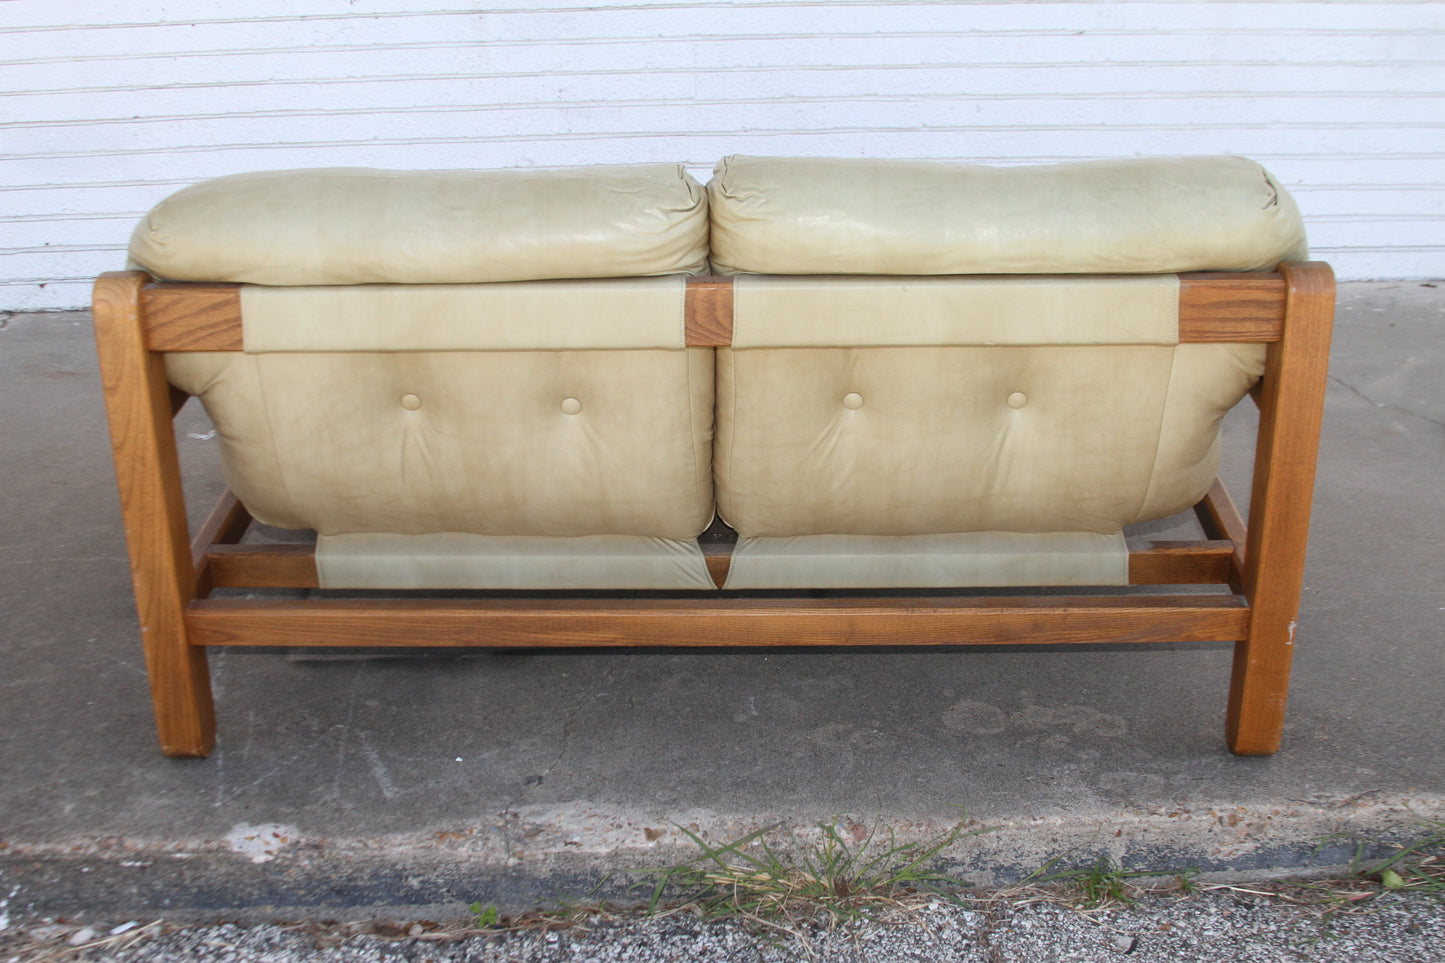  teak loveseat. Expertly crafted, this love seat sofa is a statement piece that will elevate your decor.